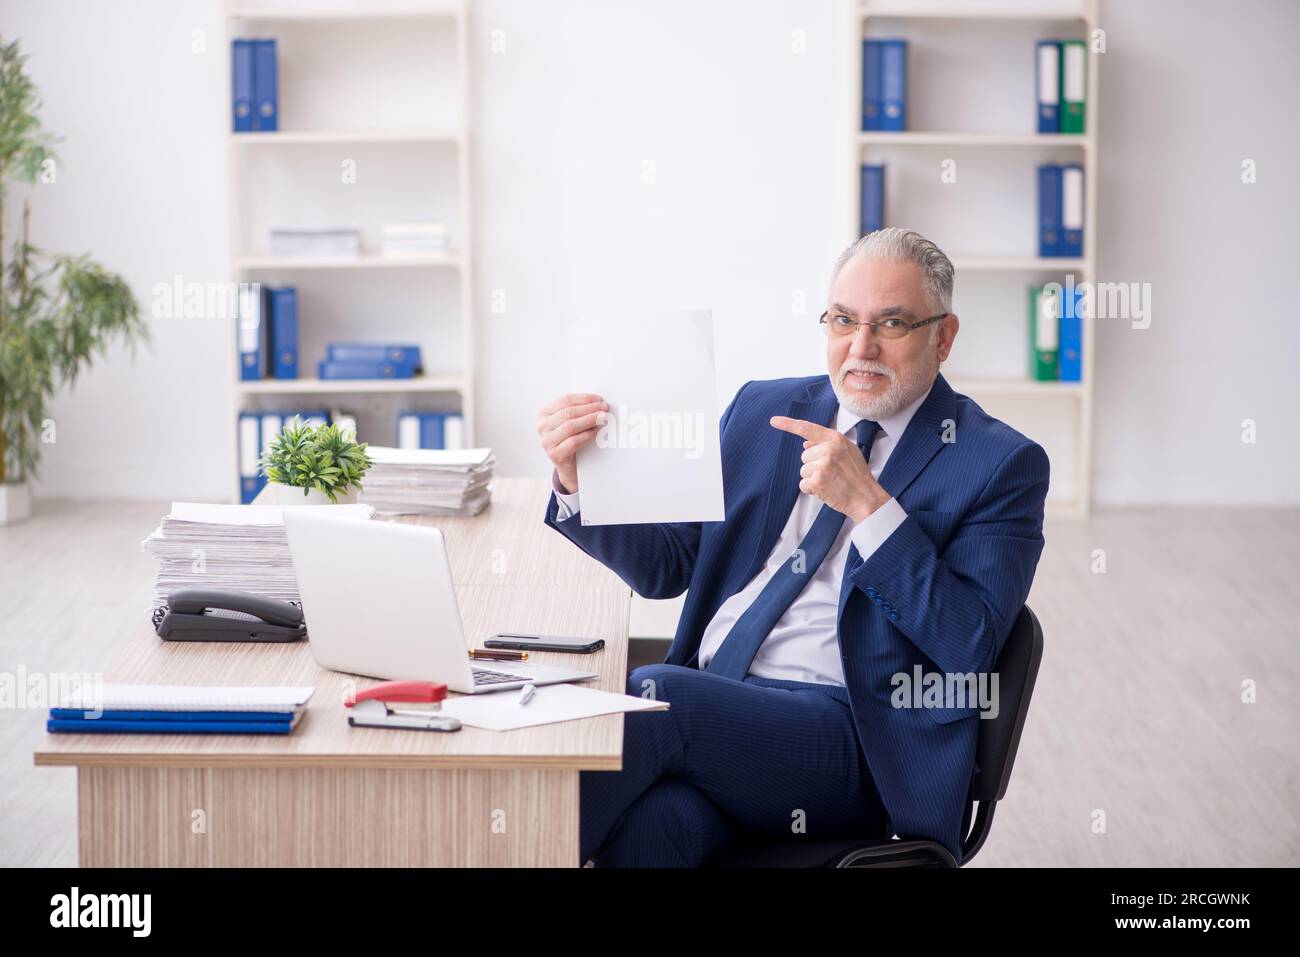 Old businessman employee working at workplace Stock Photo